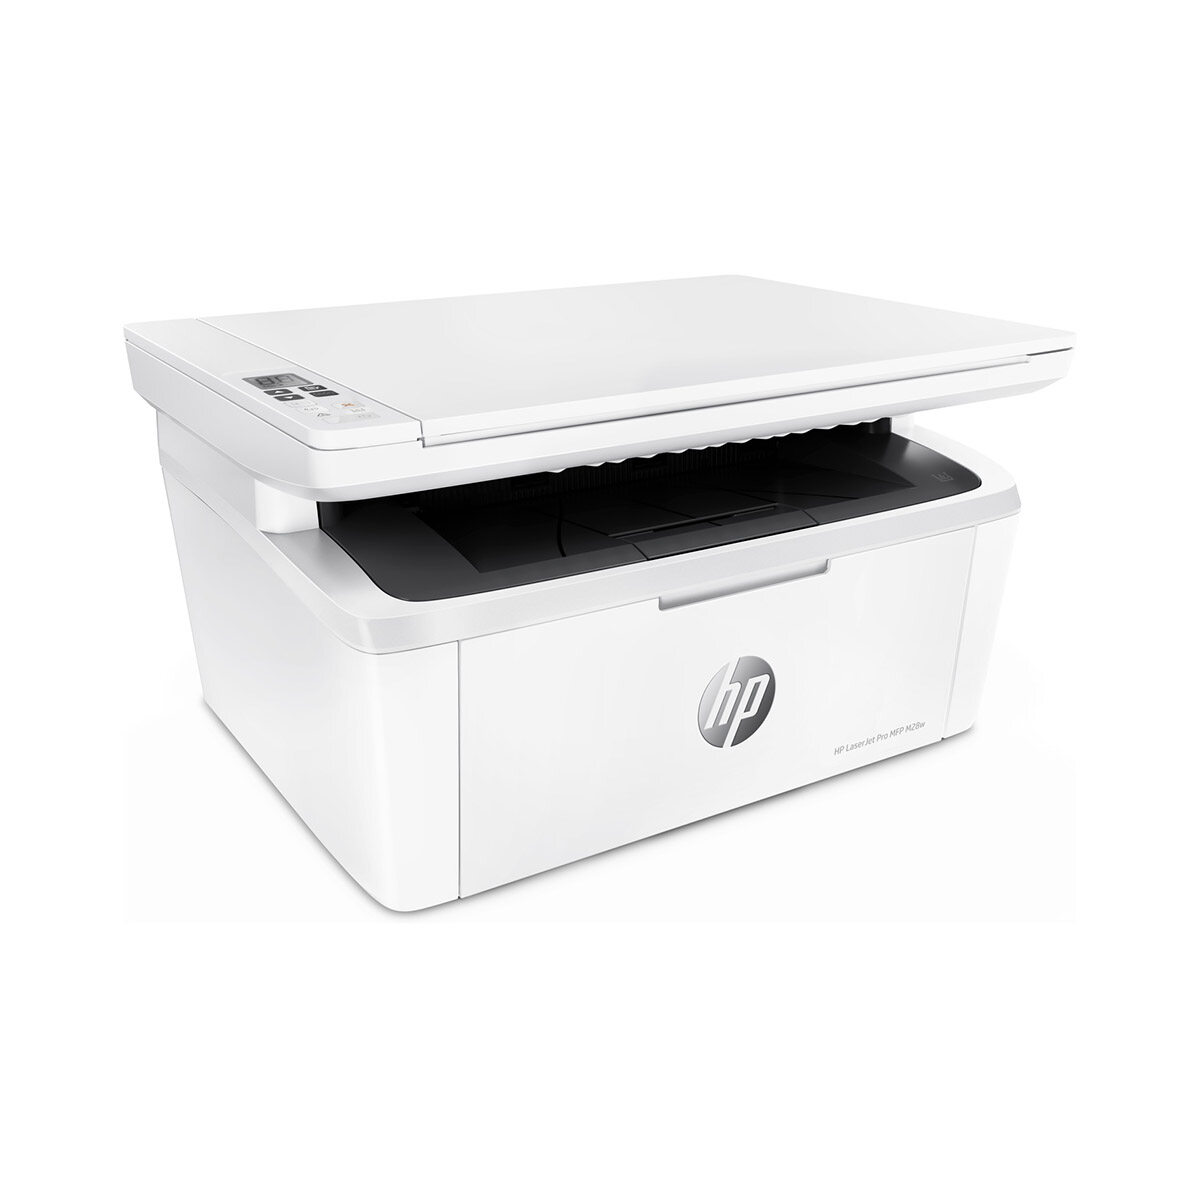 HP LASERJET PRO MFP M28W PRINTER PRINT, SCAN, COPY, WIRELESS 3 Years Onsite Warranty with 1-to-1 Unit exchange **NEED TO ONLINE REGISTER**